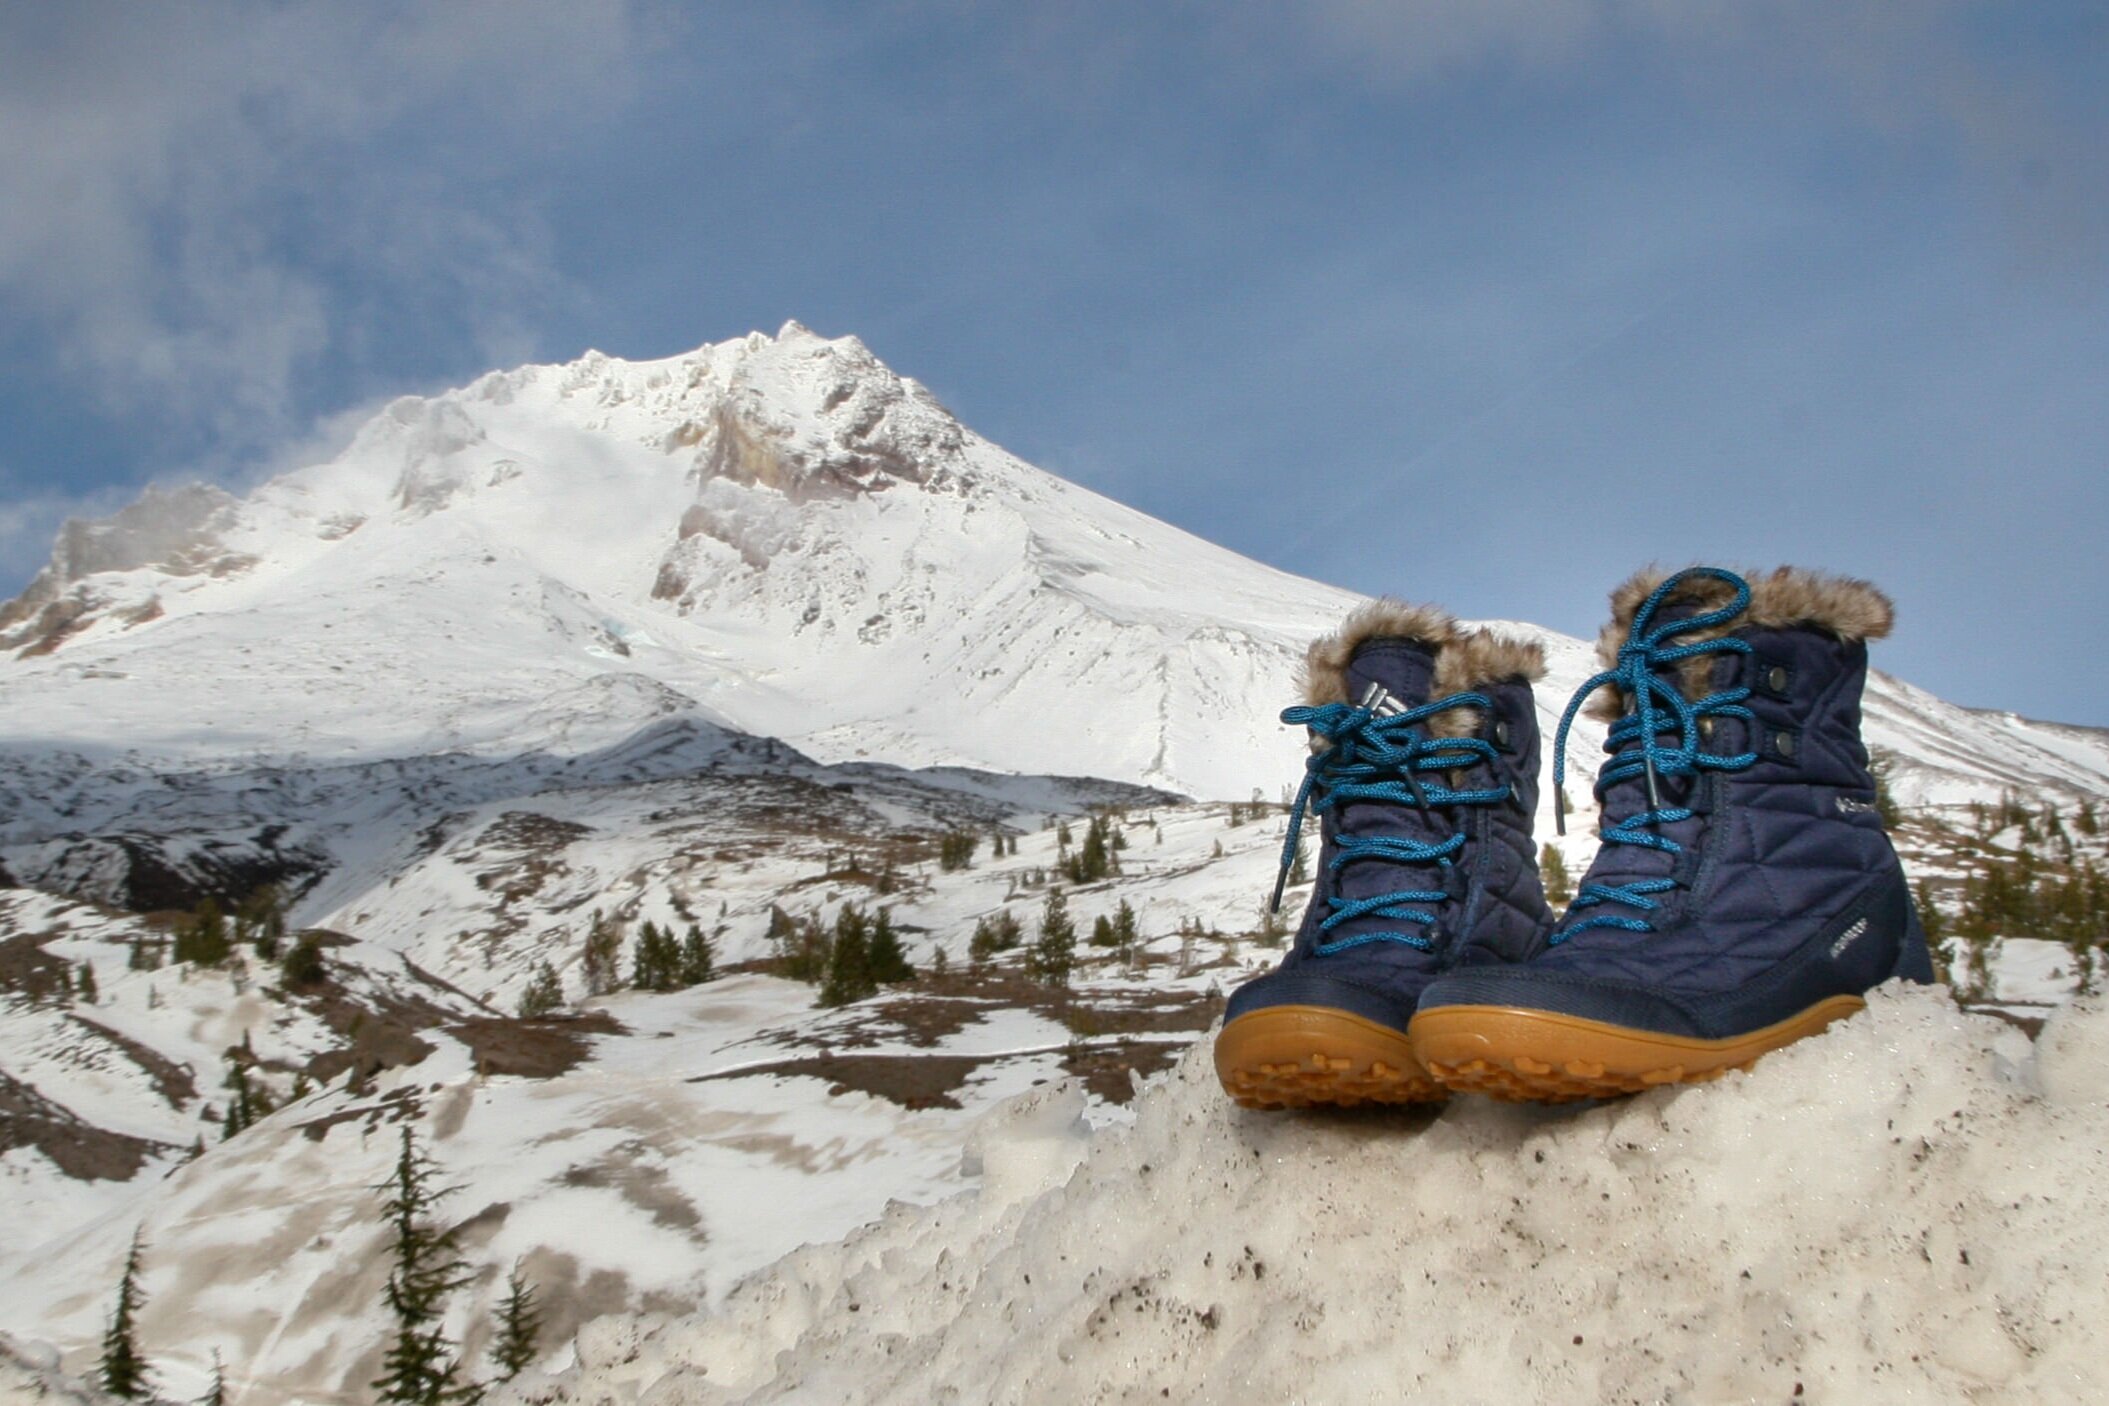 The Columbia Minx Shorty III are versatile winter boots that work well for around town or for hiking.